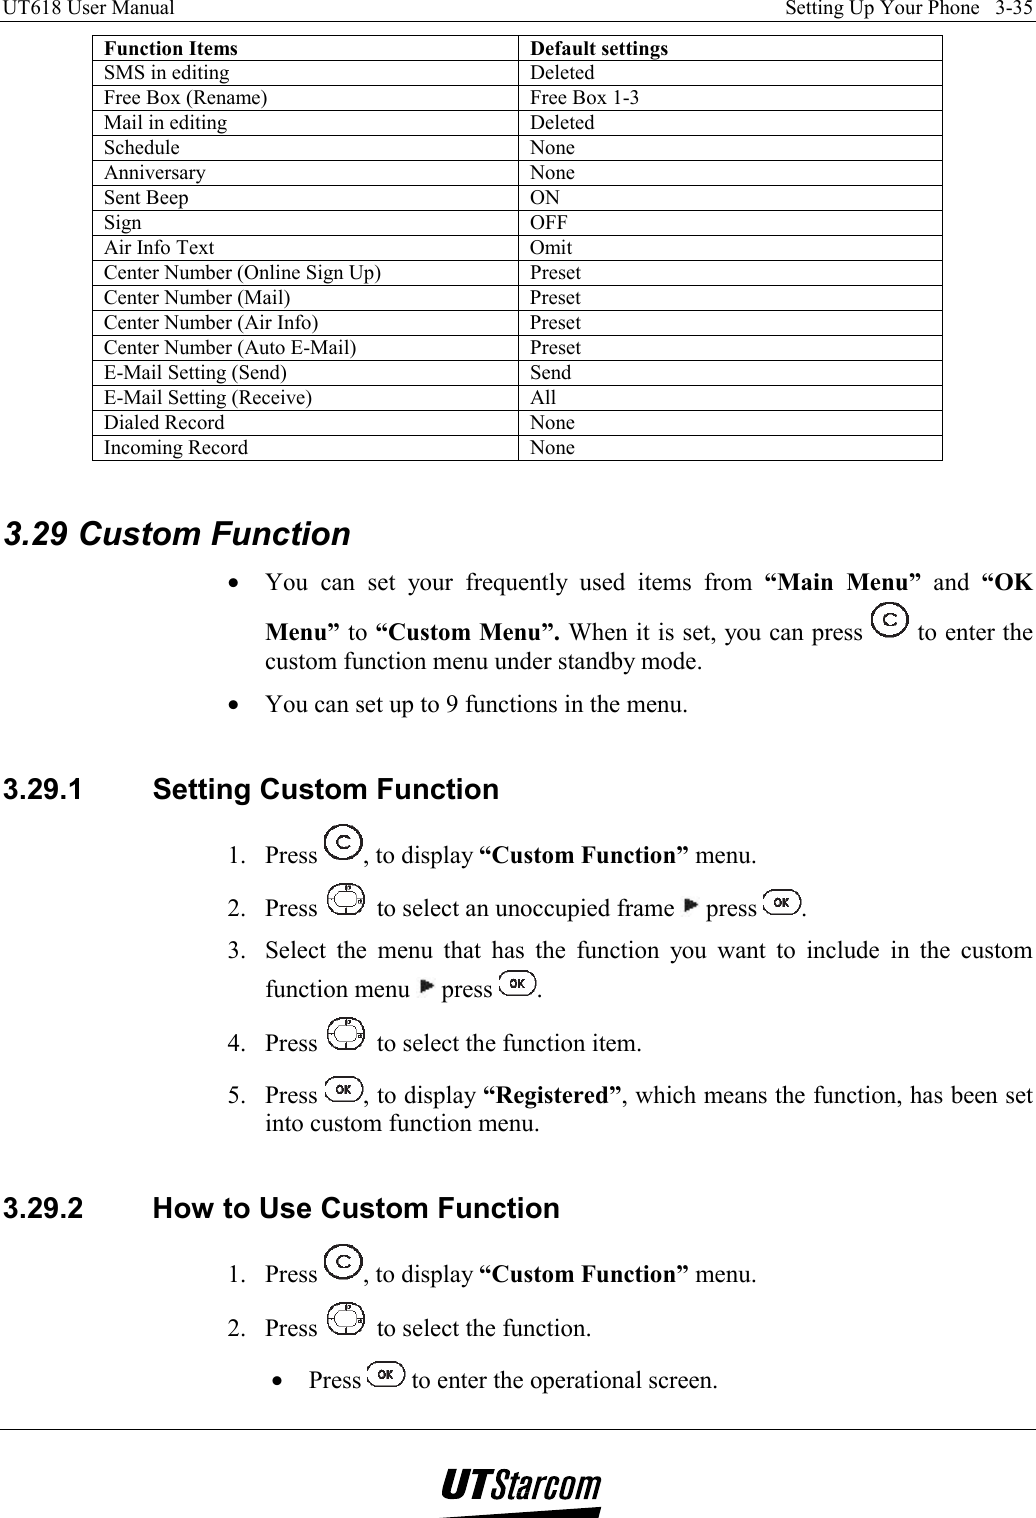 UT618 User Manual    Setting Up Your Phone   3-35   Function Items  Default settings SMS in editing  Deleted Free Box (Rename)  Free Box 1-3 Mail in editing  Deleted Schedule None Anniversary None Sent Beep  ON Sign OFF Air Info Text  Omit Center Number (Online Sign Up)  Preset Center Number (Mail)  Preset Center Number (Air Info)  Preset Center Number (Auto E-Mail)  Preset E-Mail Setting (Send)  Send E-Mail Setting (Receive)  All Dialed Record  None Incoming Record  None  3.29 Custom Function •  You can set your frequently used items from “Main Menu” and “OK Menu” to “Custom Menu”. When it is set, you can press   to enter the custom function menu under standby mode. •  You can set up to 9 functions in the menu.  3.29.1  Setting Custom Function 1. Press  , to display “Custom Function” menu. 2. Press   to select an unoccupied frame   press  . 3.  Select the menu that has the function you want to include in the custom function menu   press  . 4. Press   to select the function item. 5. Press  , to display “Registered”, which means the function, has been set into custom function menu.  3.29.2  How to Use Custom Function 1. Press  , to display “Custom Function” menu. 2. Press   to select the function. •  Press   to enter the operational screen. 